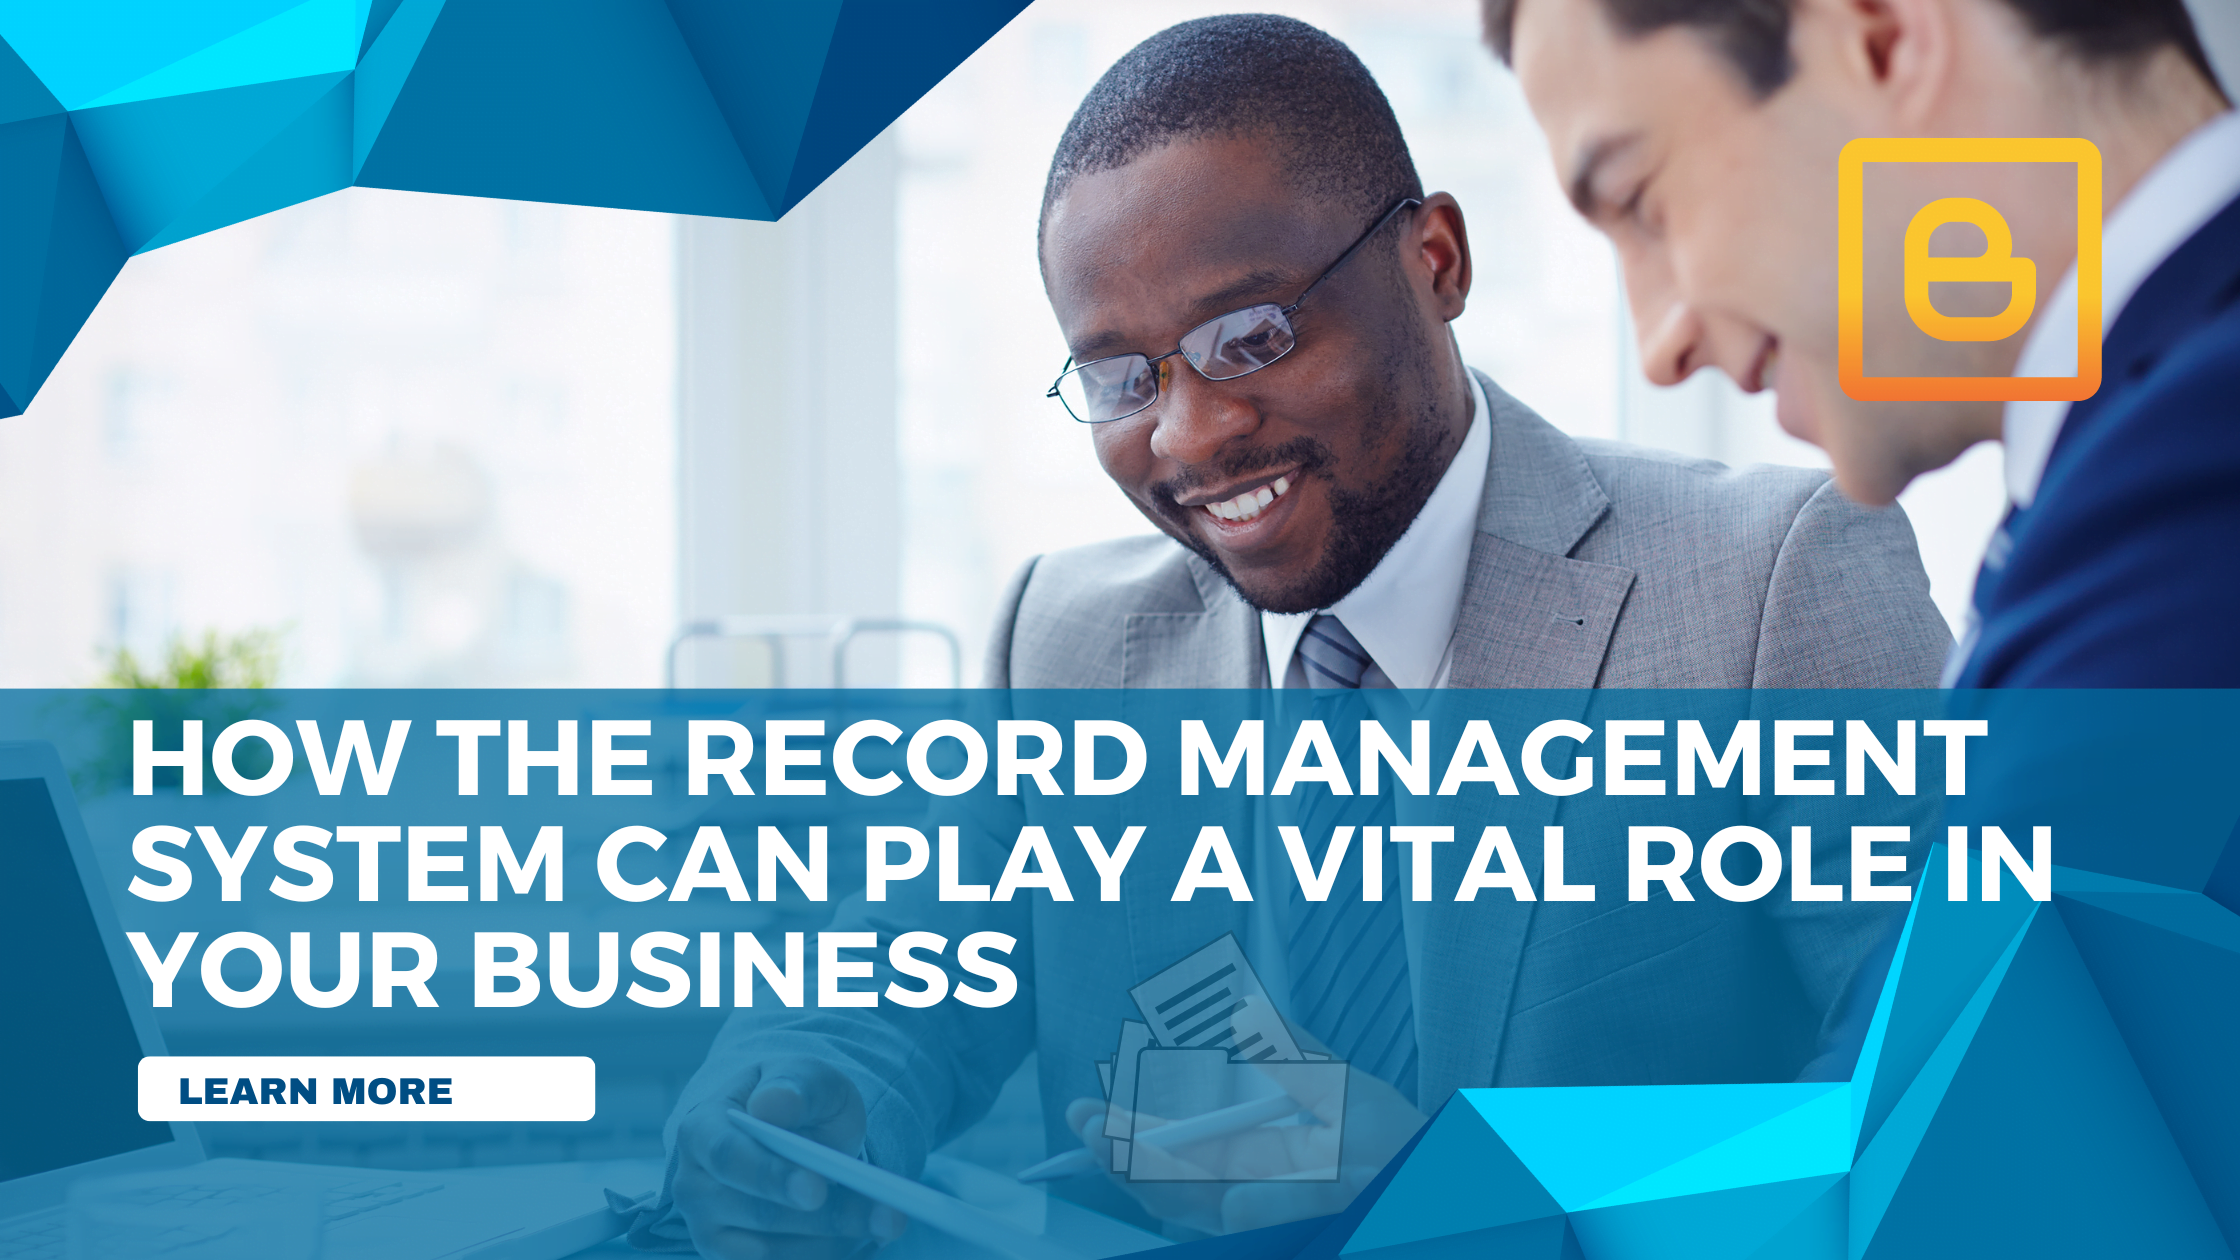 How the record management system can play a vital role in your business